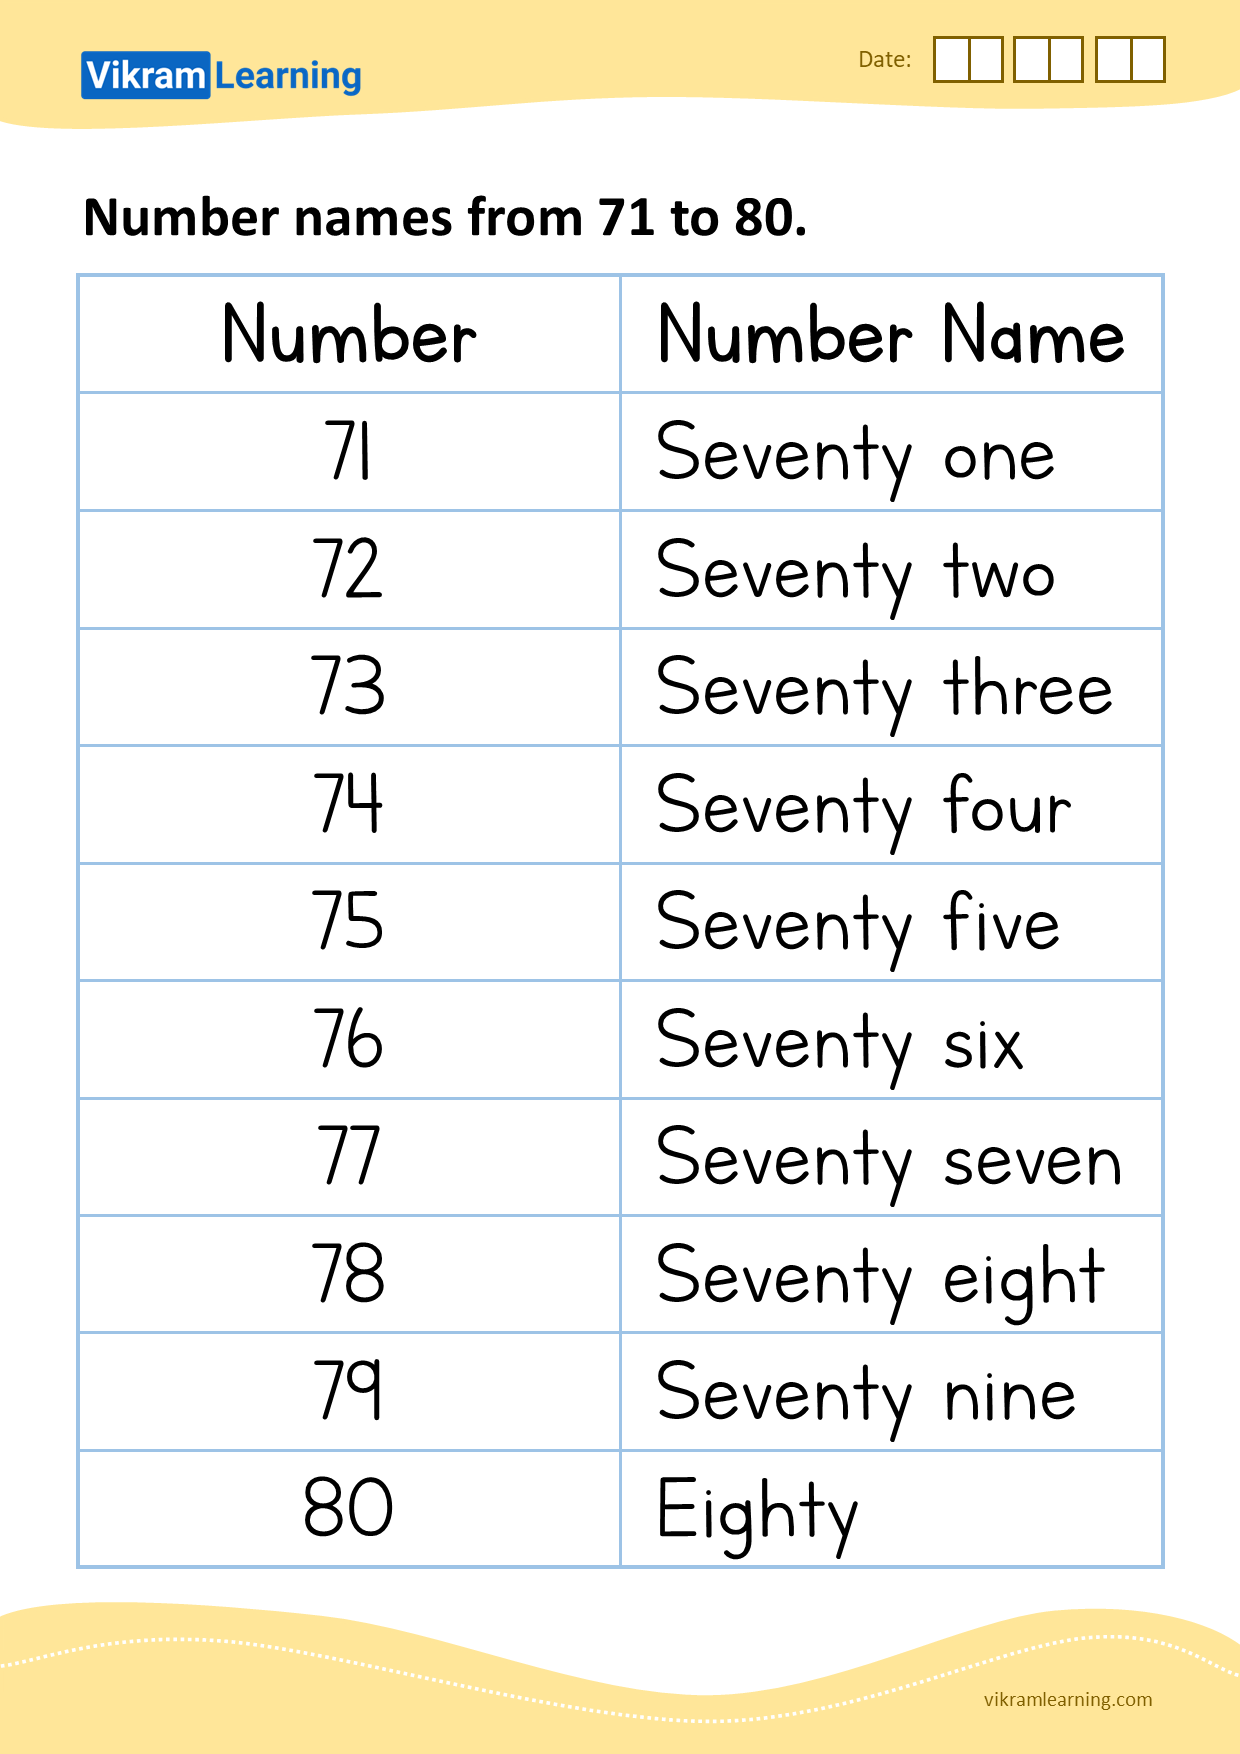 download-number-names-from-71-to-80-worksheets-vikramlearning